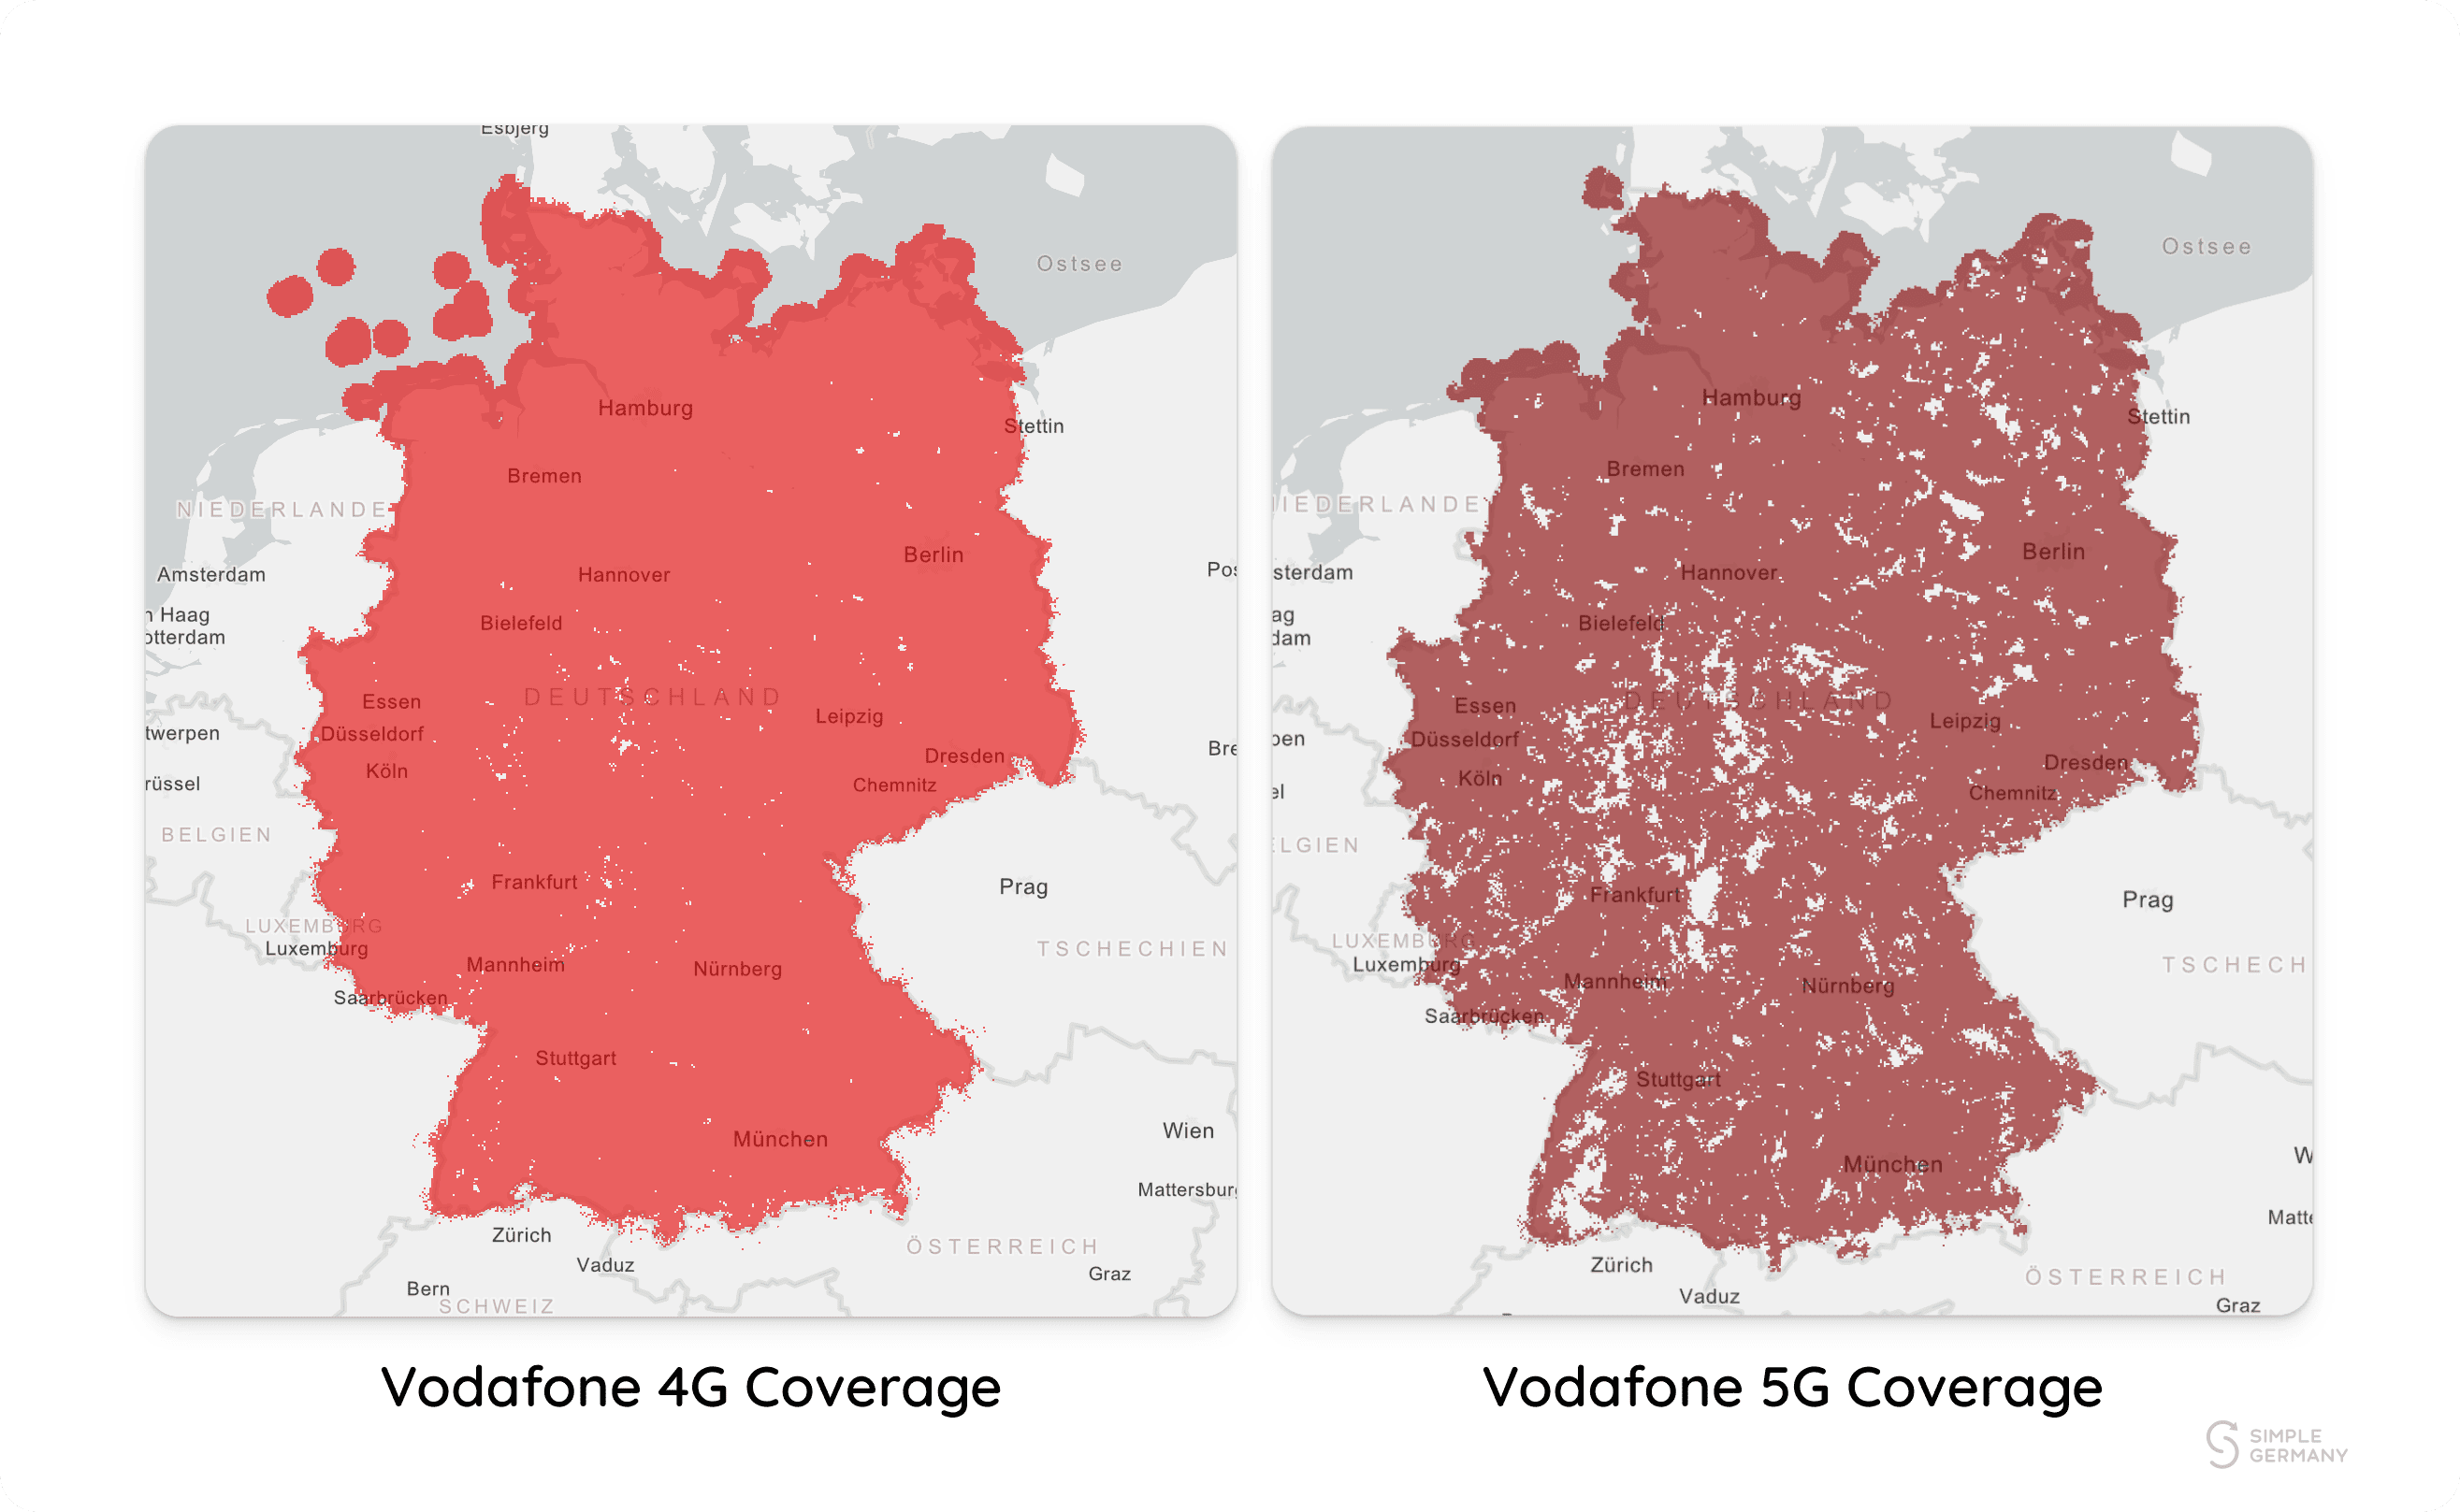 German maps with 4G and 5G coverage mapped out